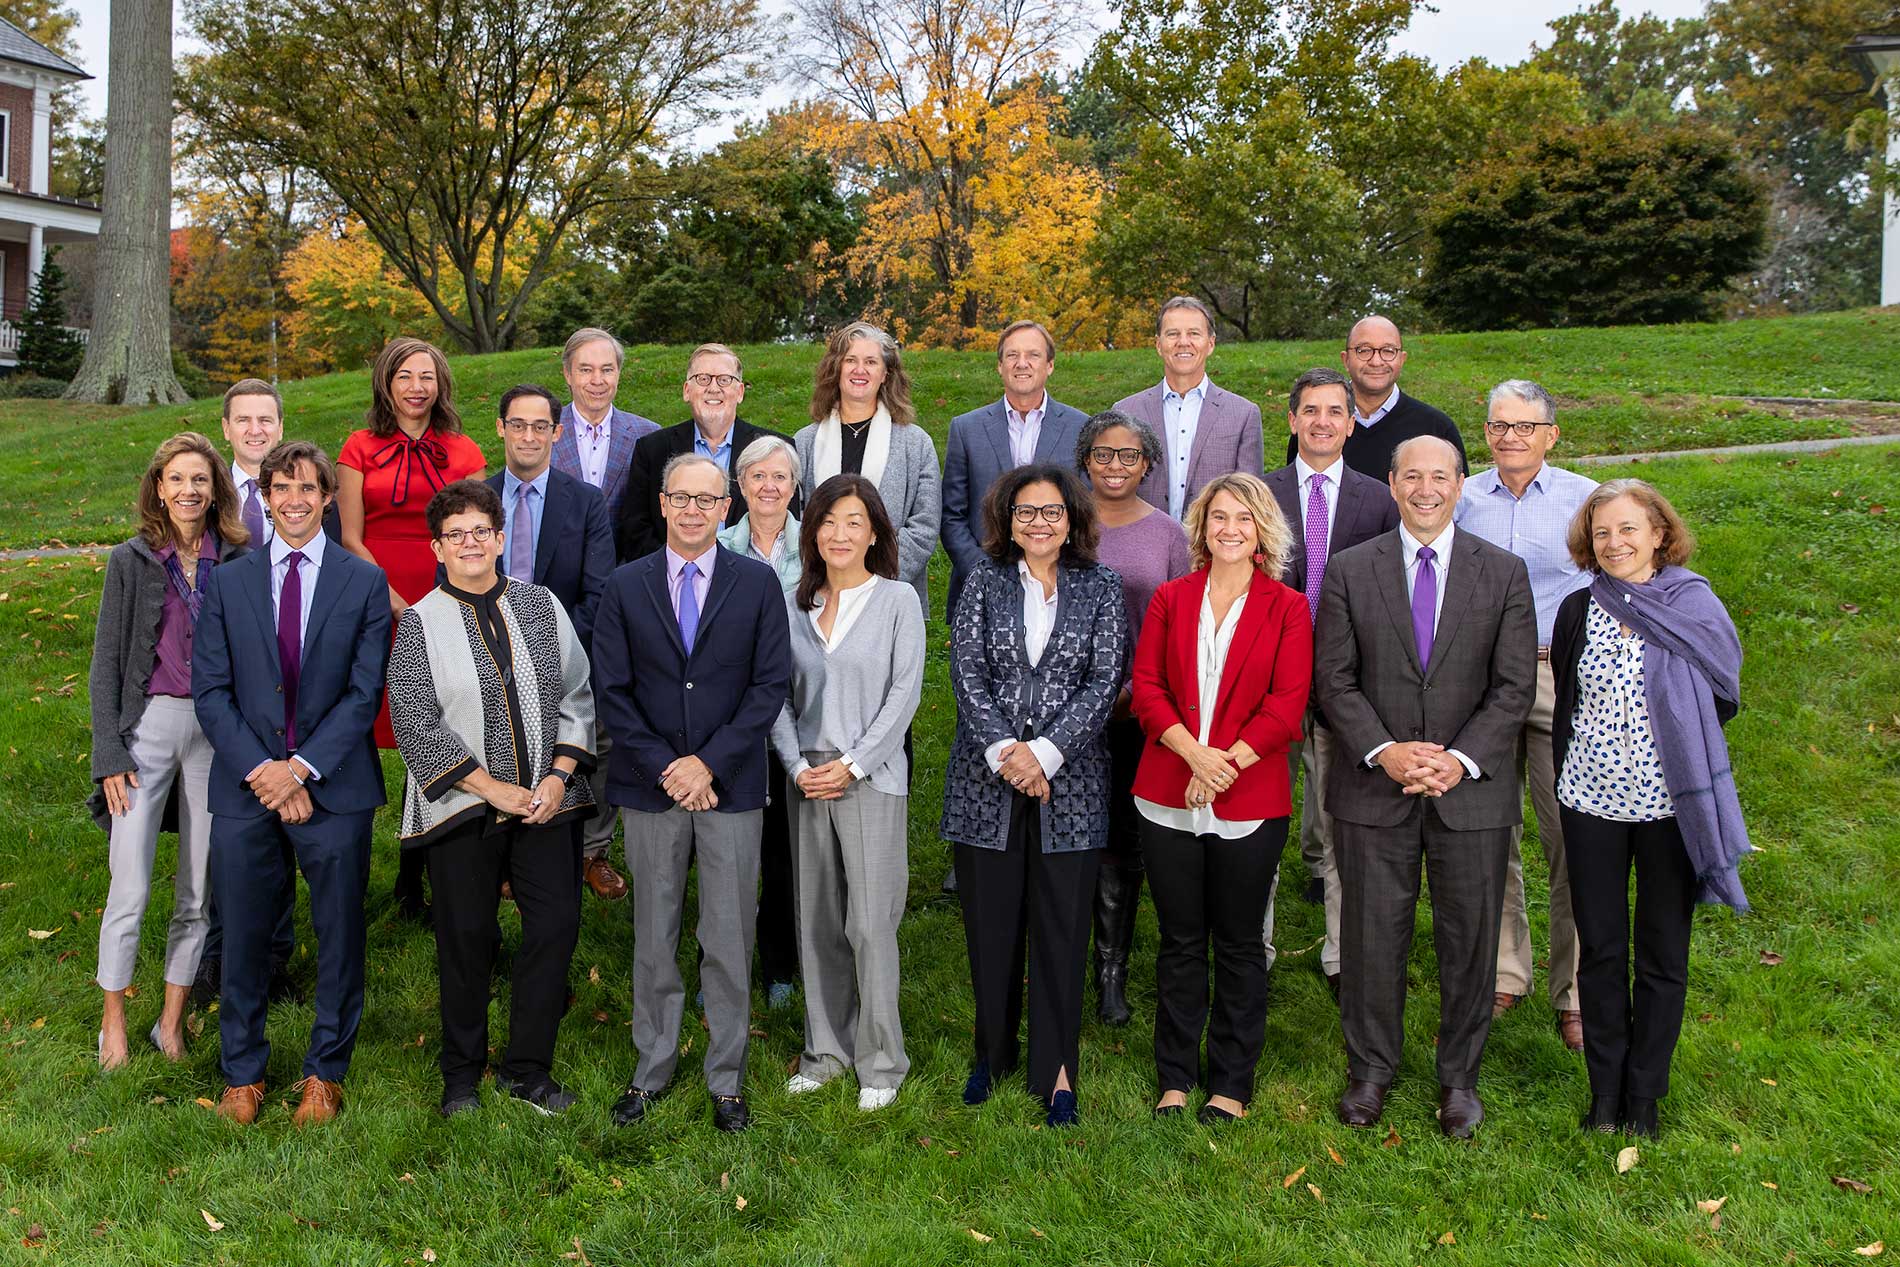 Amherst College board of trustees gather for a photo outside.